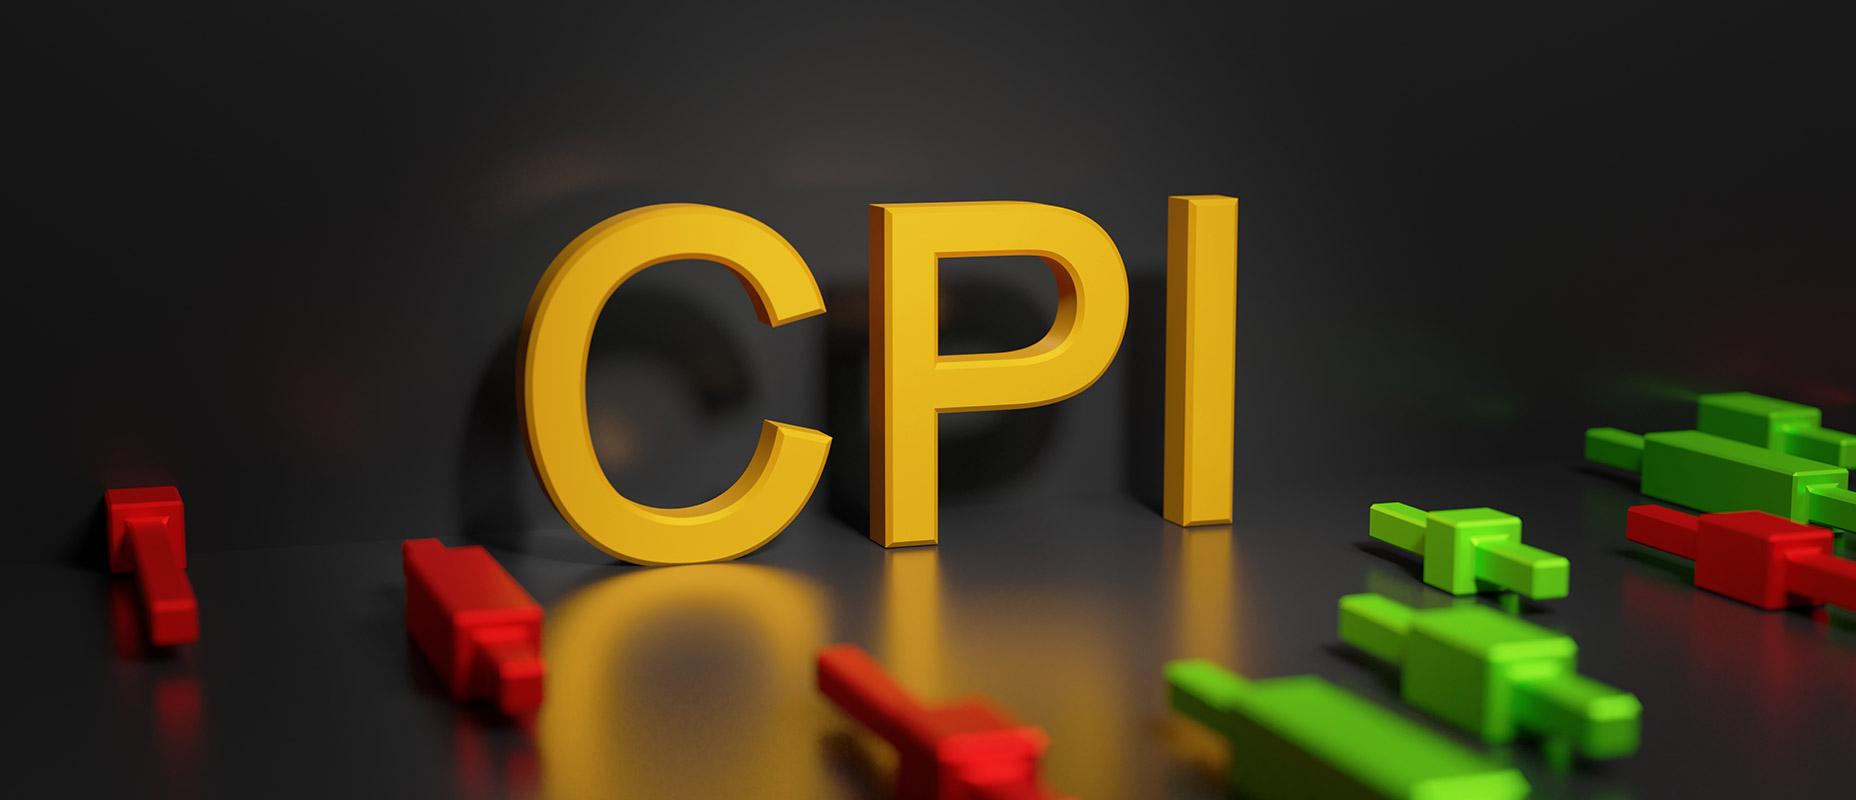 How the CPI Affects Oil Prices